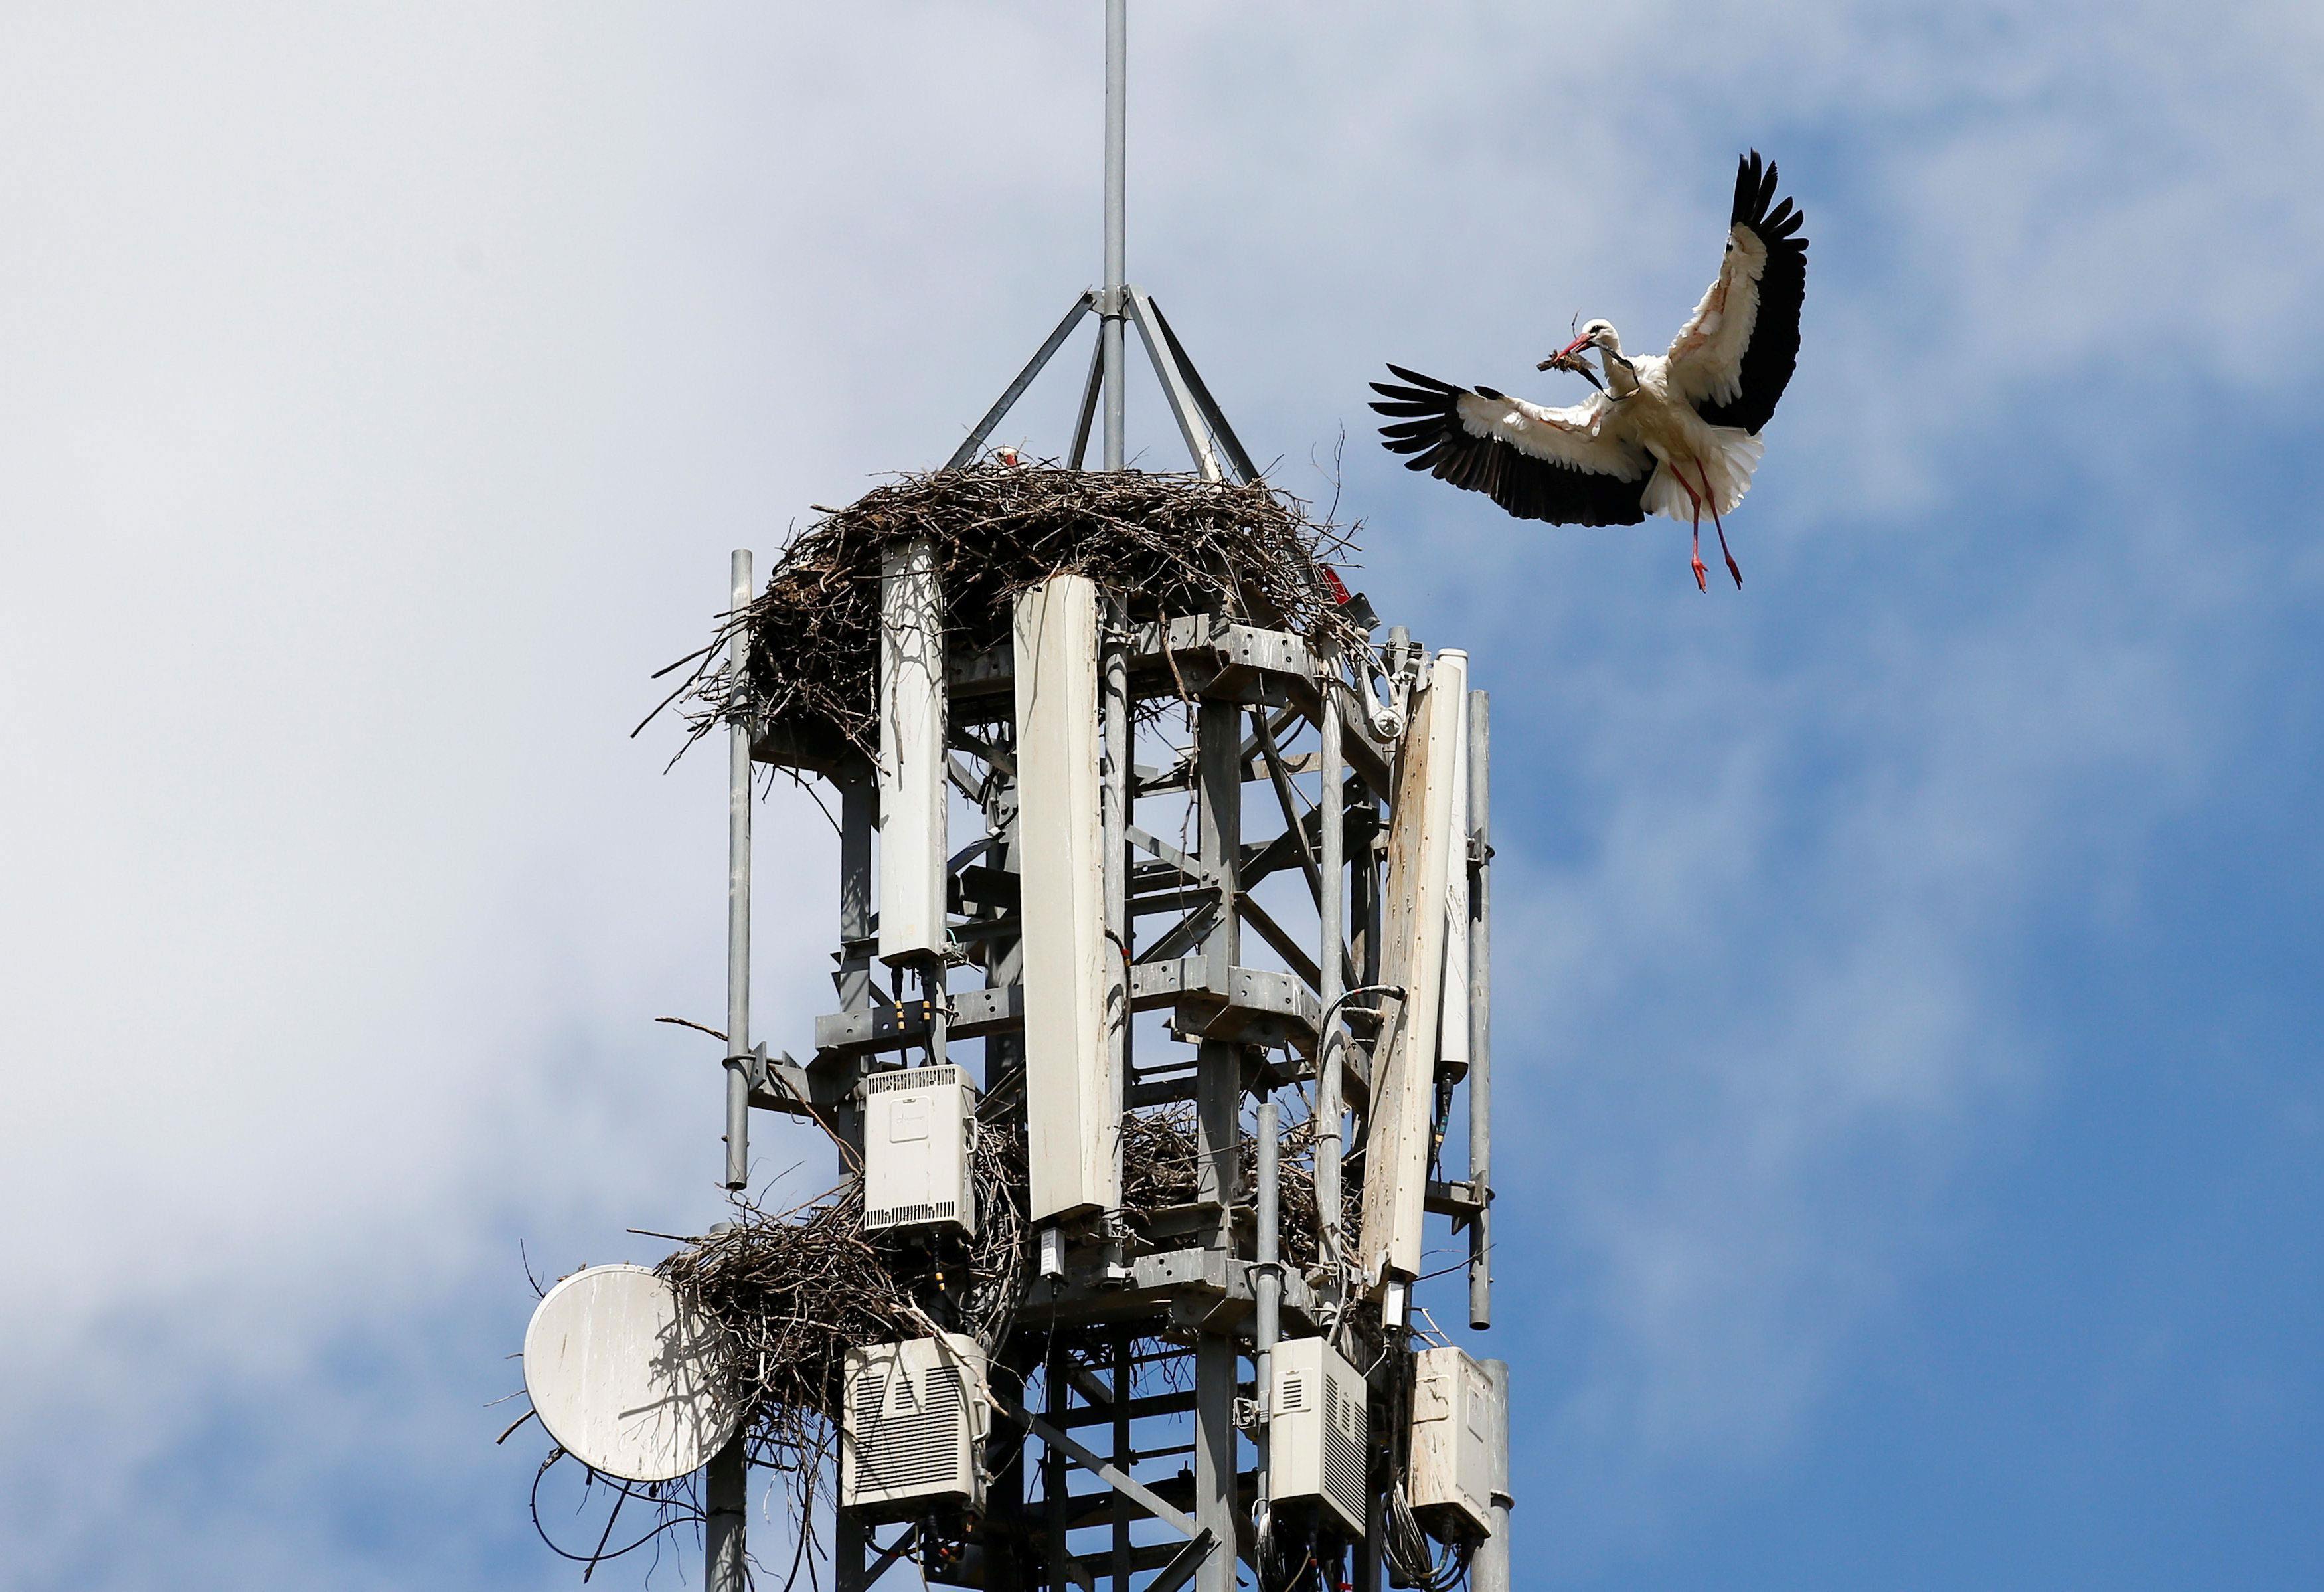 A white stork brings branches to its nest situated on a cell phone tower near Don Benito